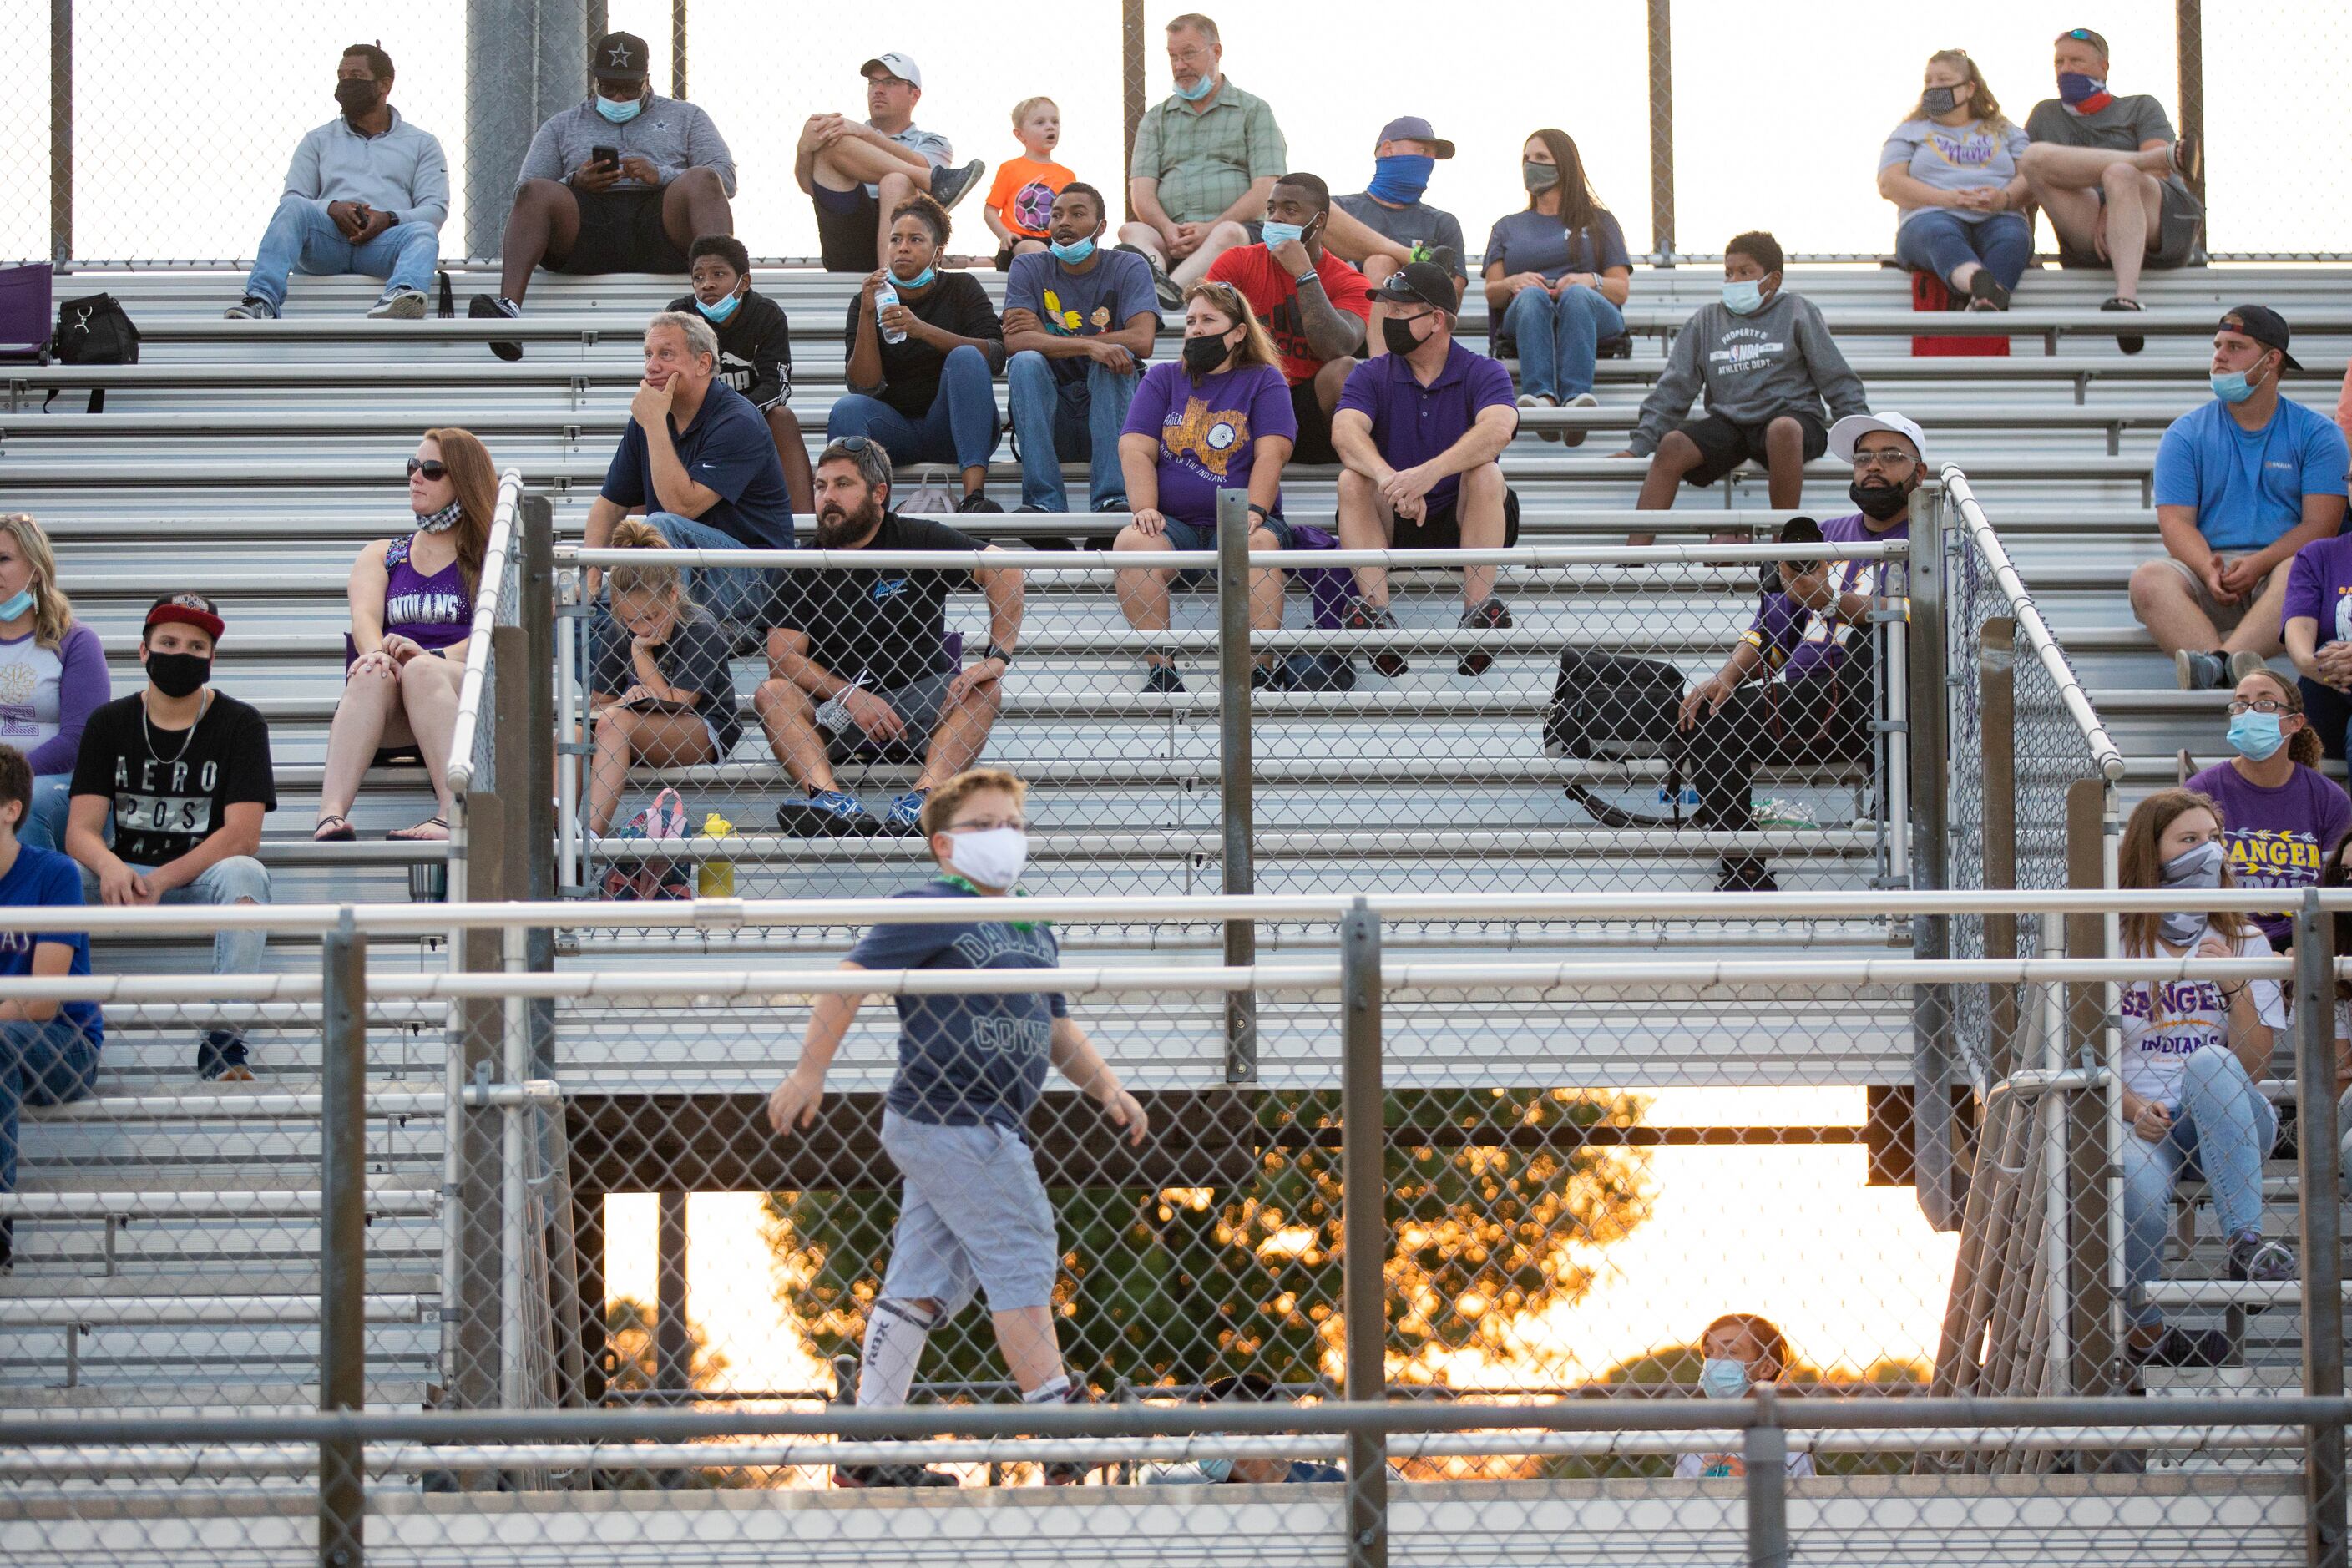 Sanger High School fans wait for the start of a game against Lake Worth High School on Sept....